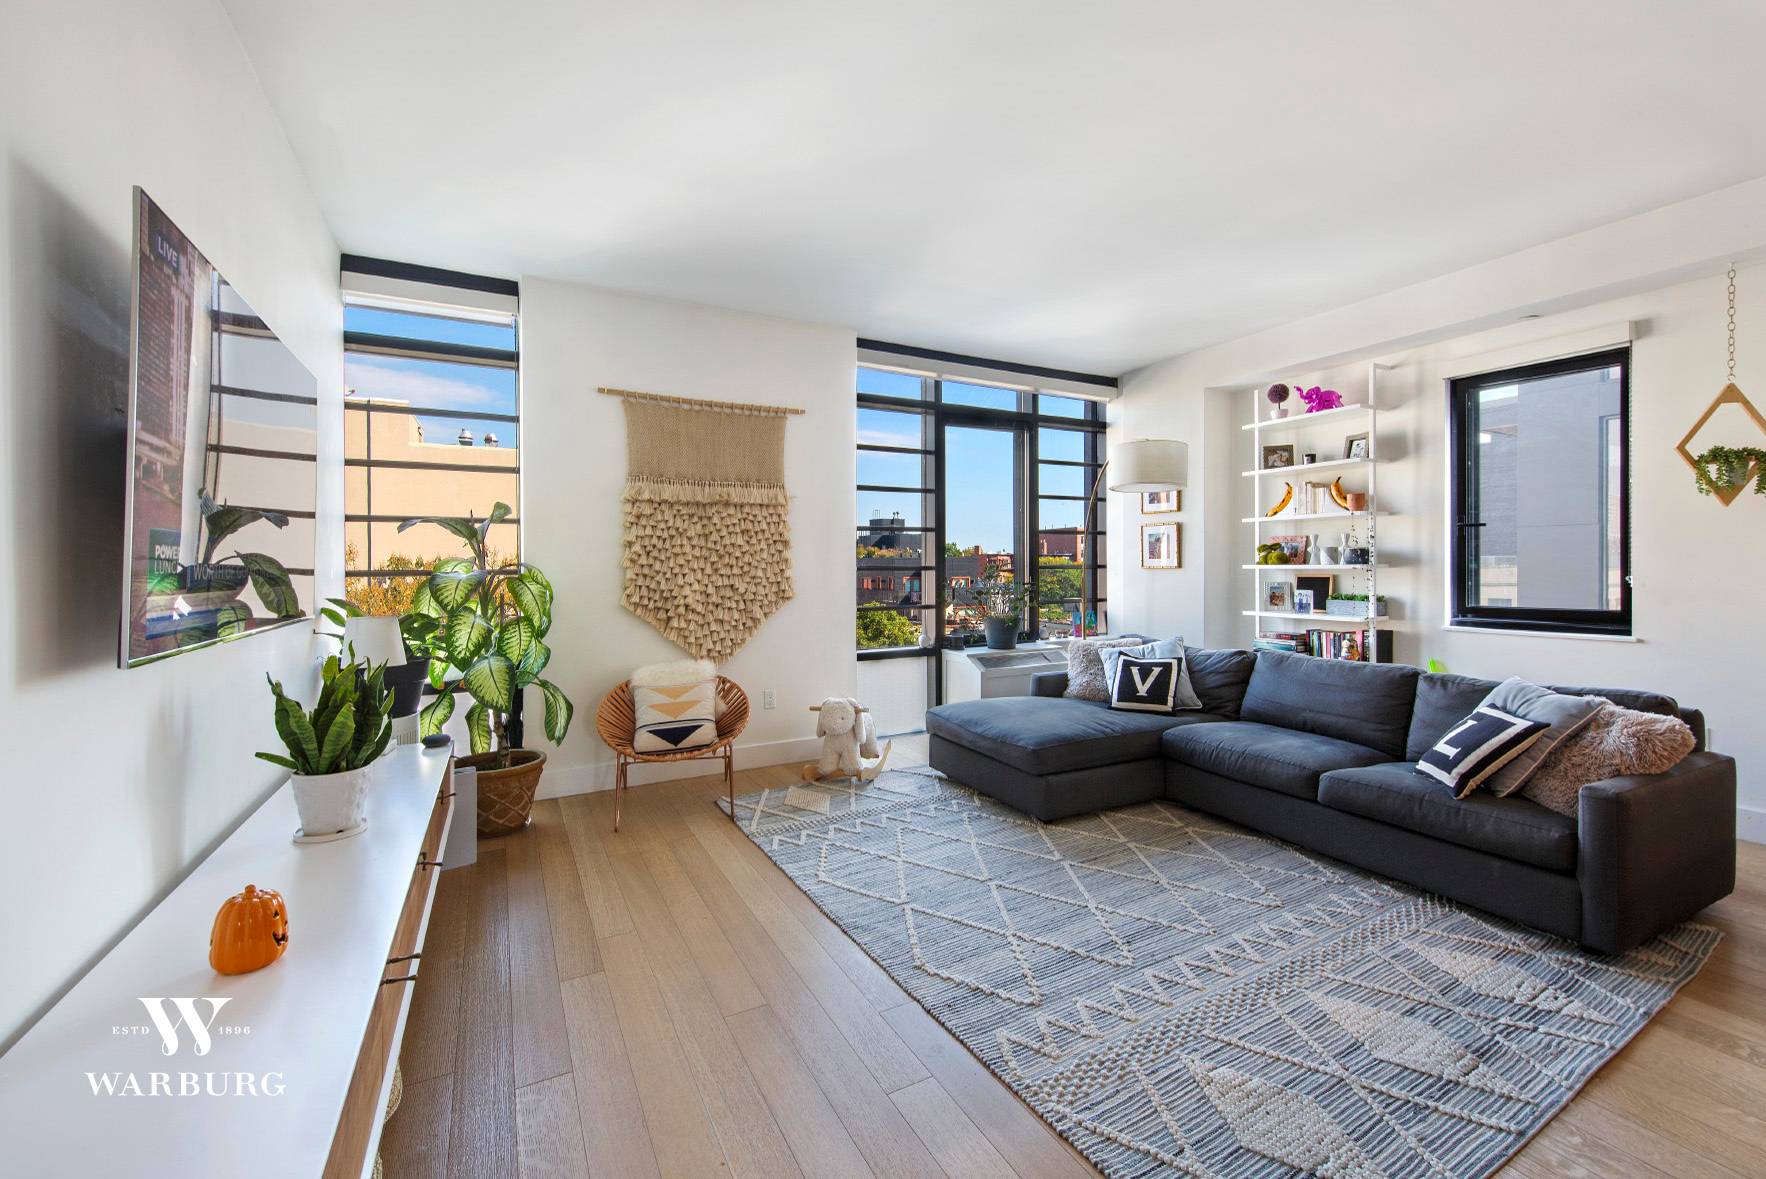 Built in 2017, Waverly Brooklyn Condominium, a 48 unit luxury building, features a striking Bauhaus inspired faA ade and is ideally located in the heart of bustling Clinton Hill, bordering ...